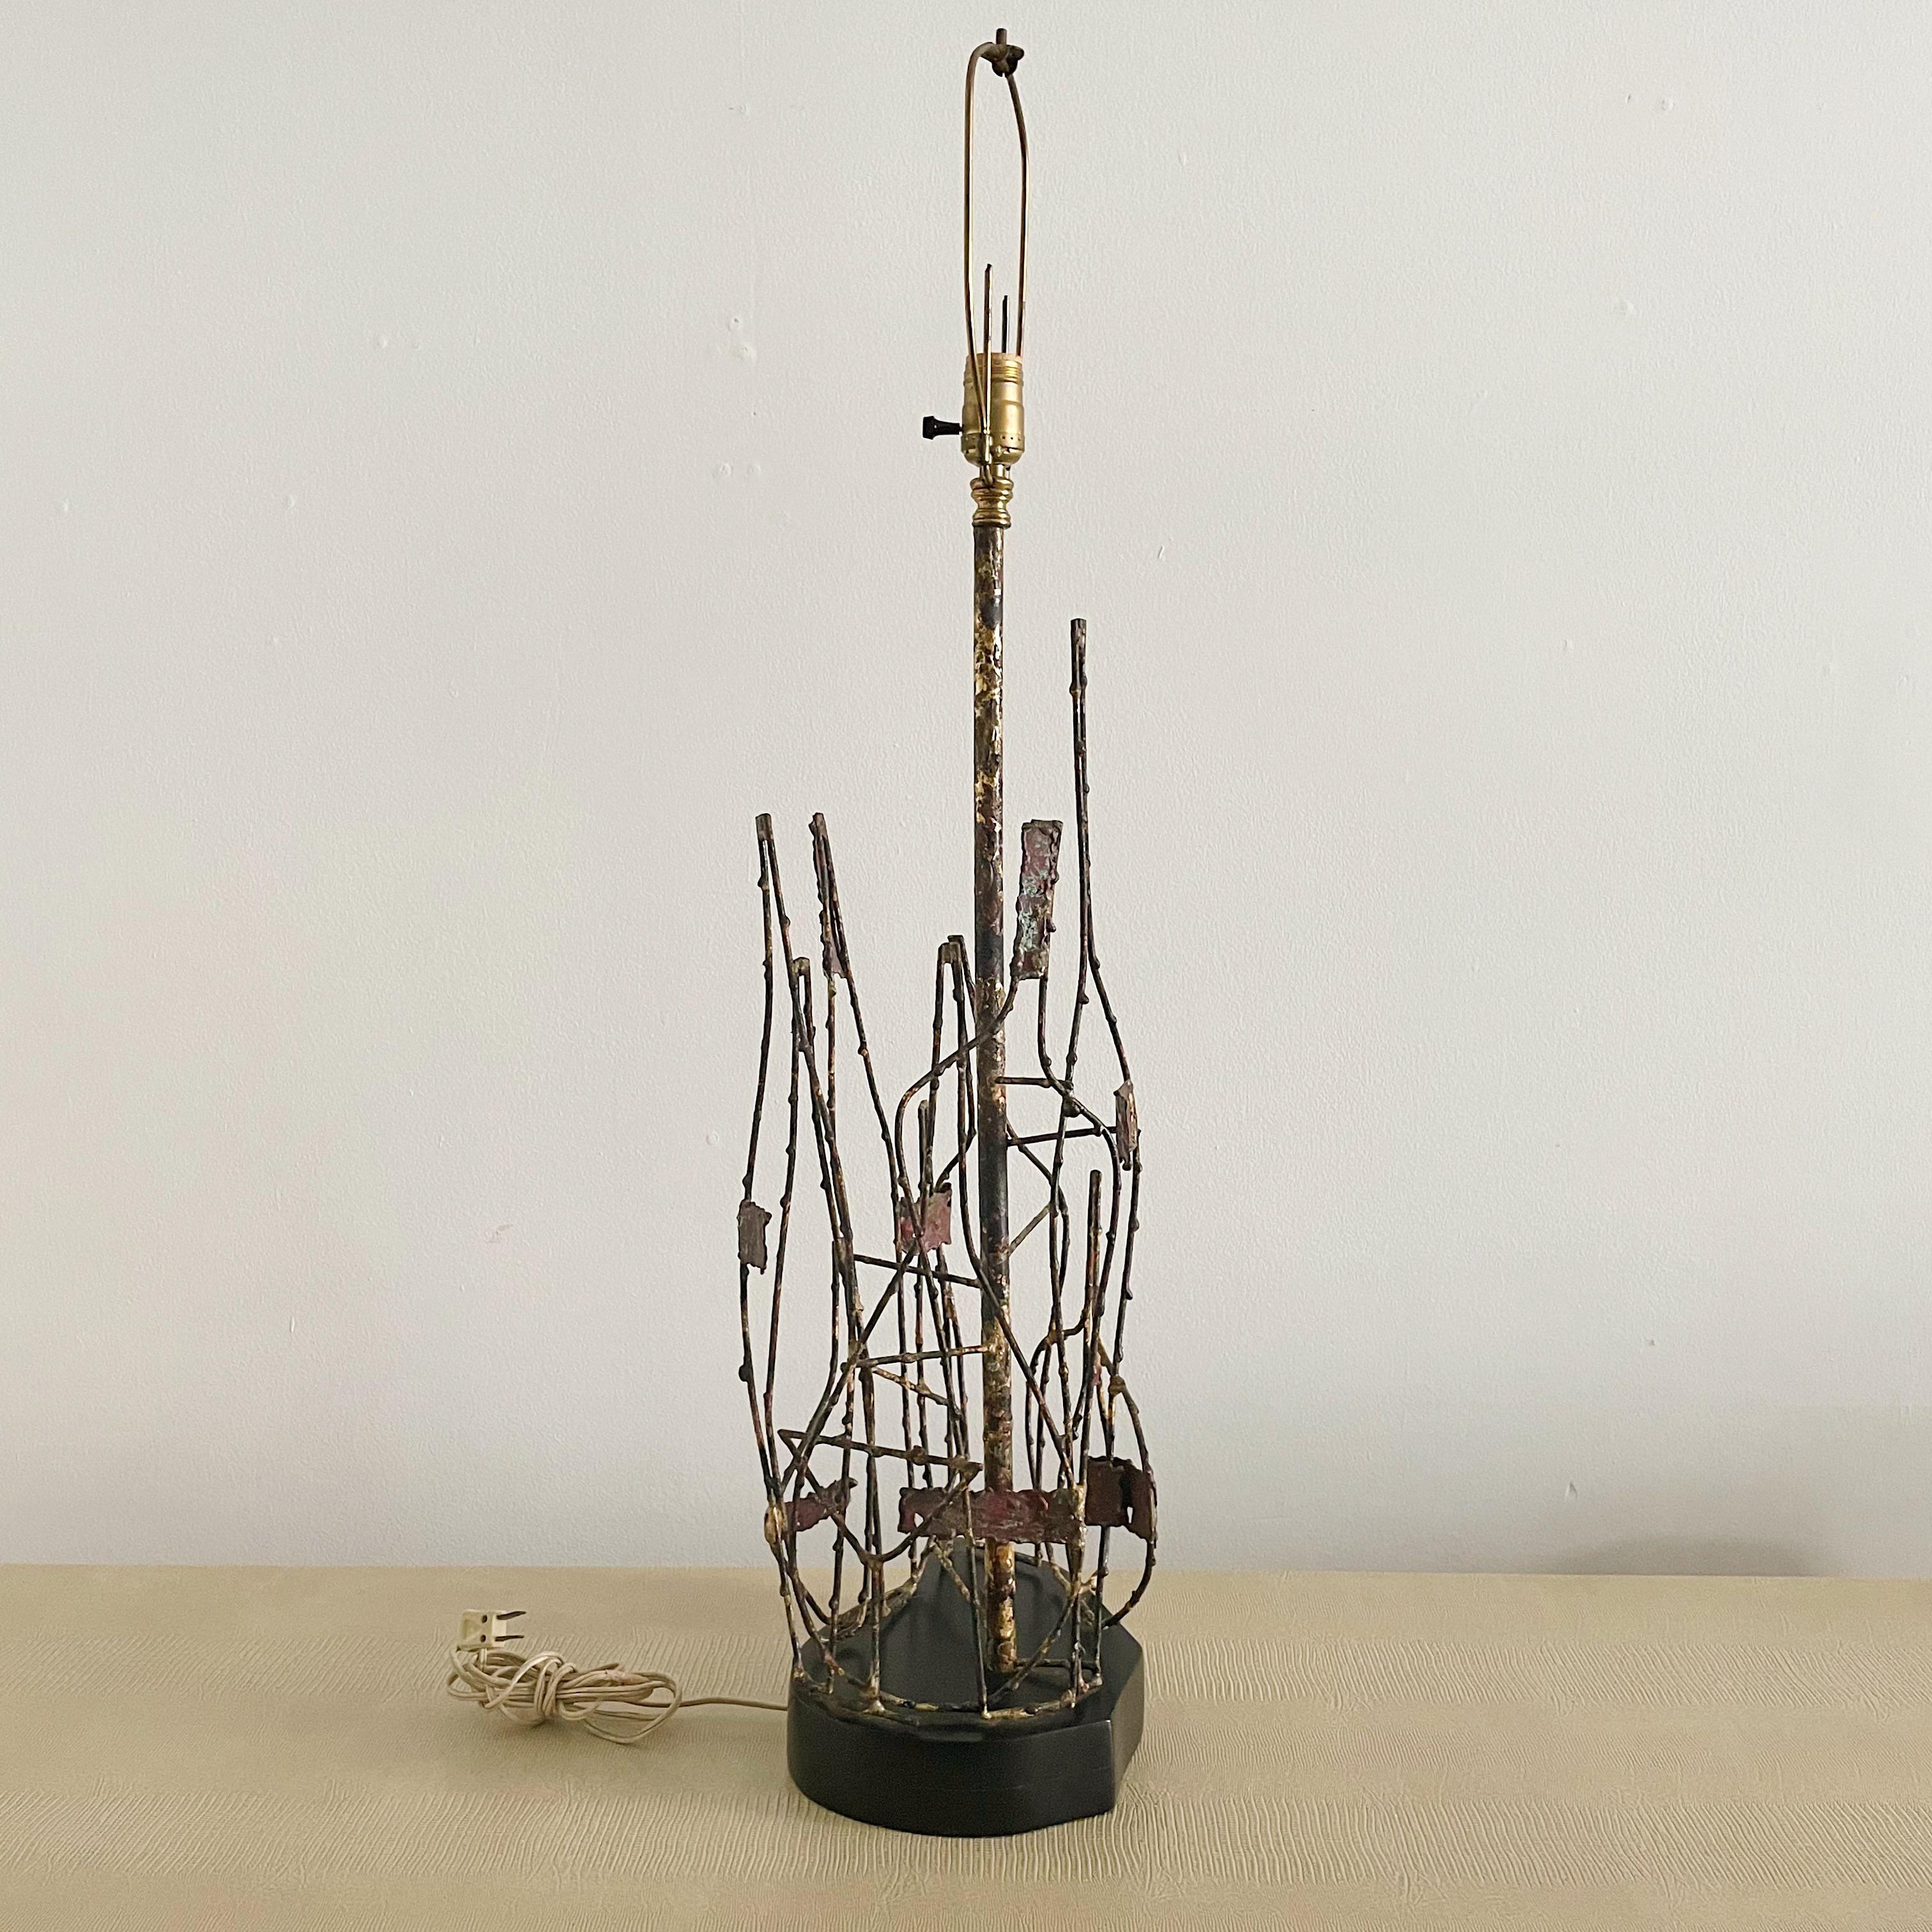 Available for purchase is a rare #347 lamp from Marcello Fantoni, which is signed and originally from Firenze, Italy. This lamp is an early example of Fantoni's work, characterized by a Brutalist painted metal body and a signature tag on a